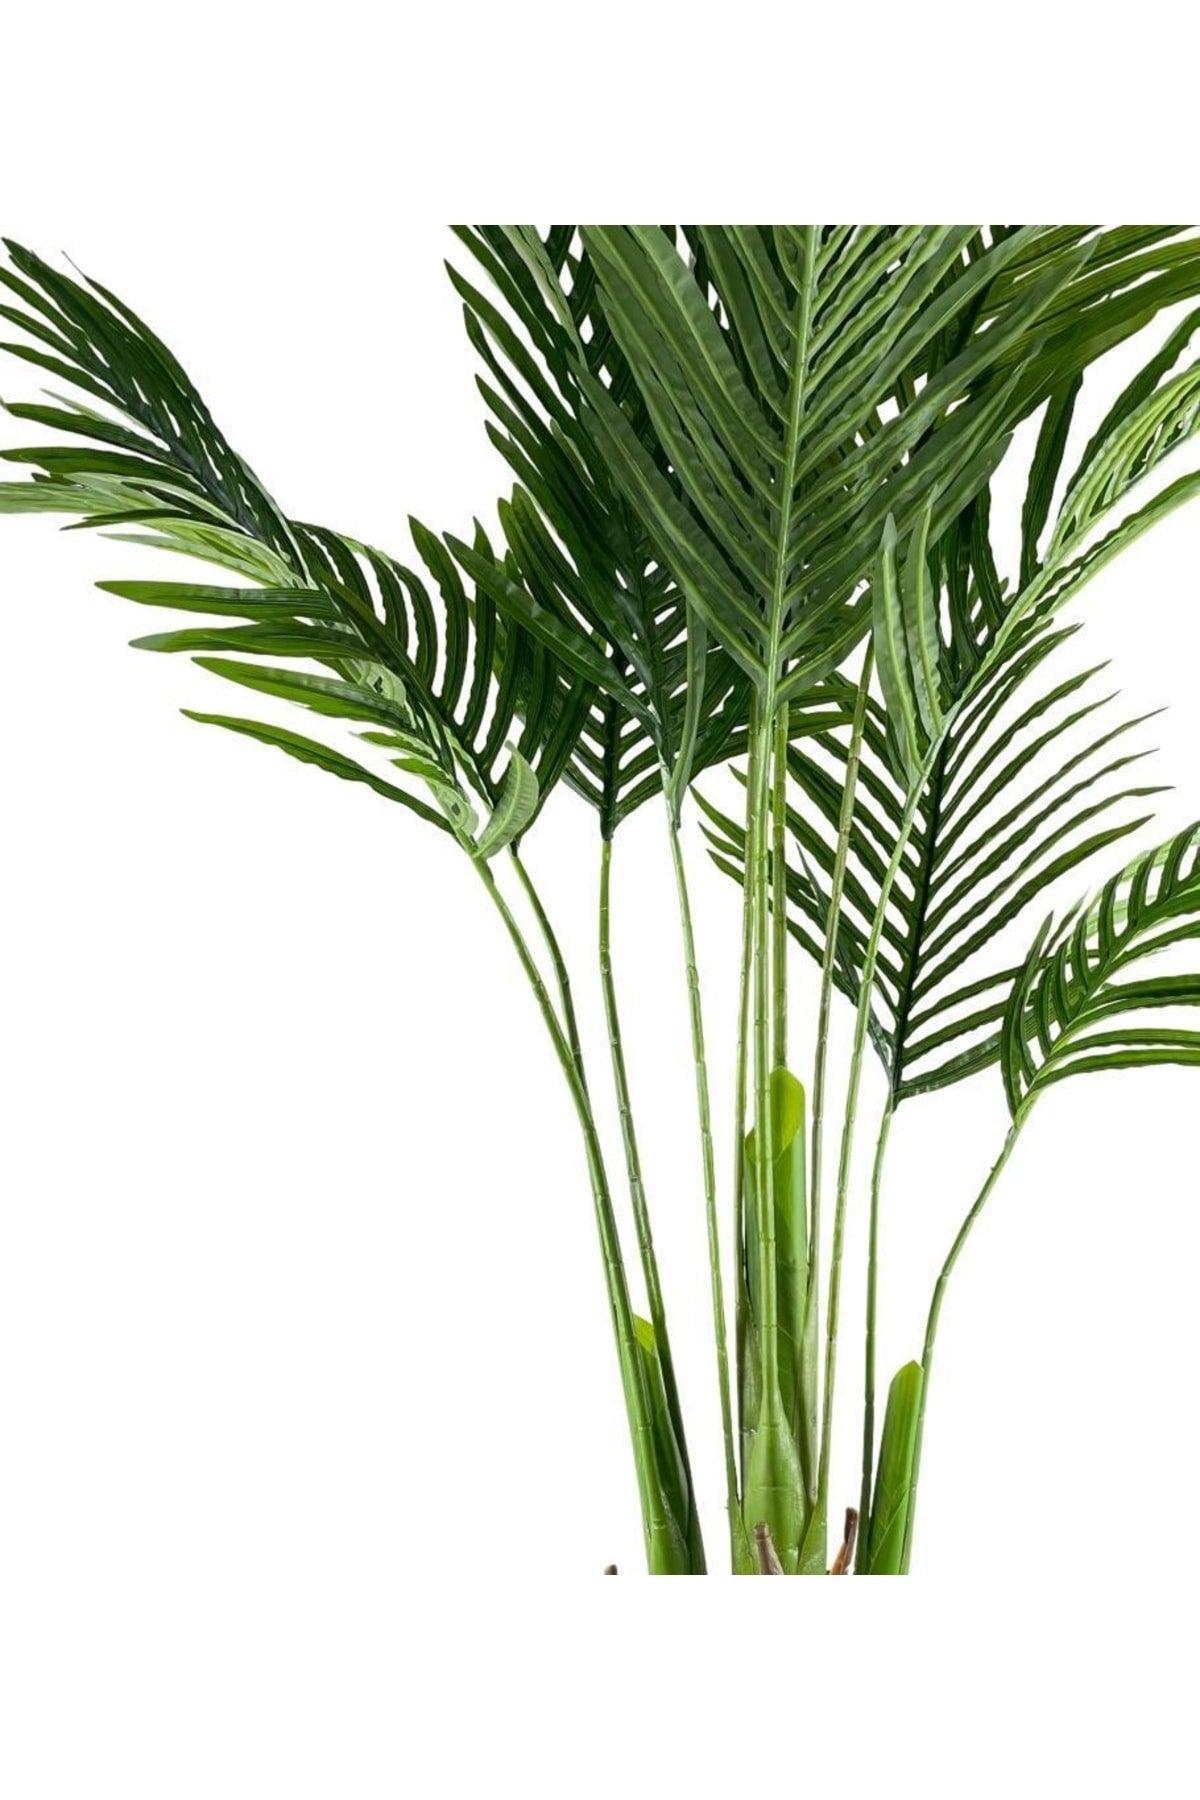 Artificial Tree Areca Tree Anthracite Tall Beach Palm Tree In Vase Artificial Areka 190cm - Swordslife